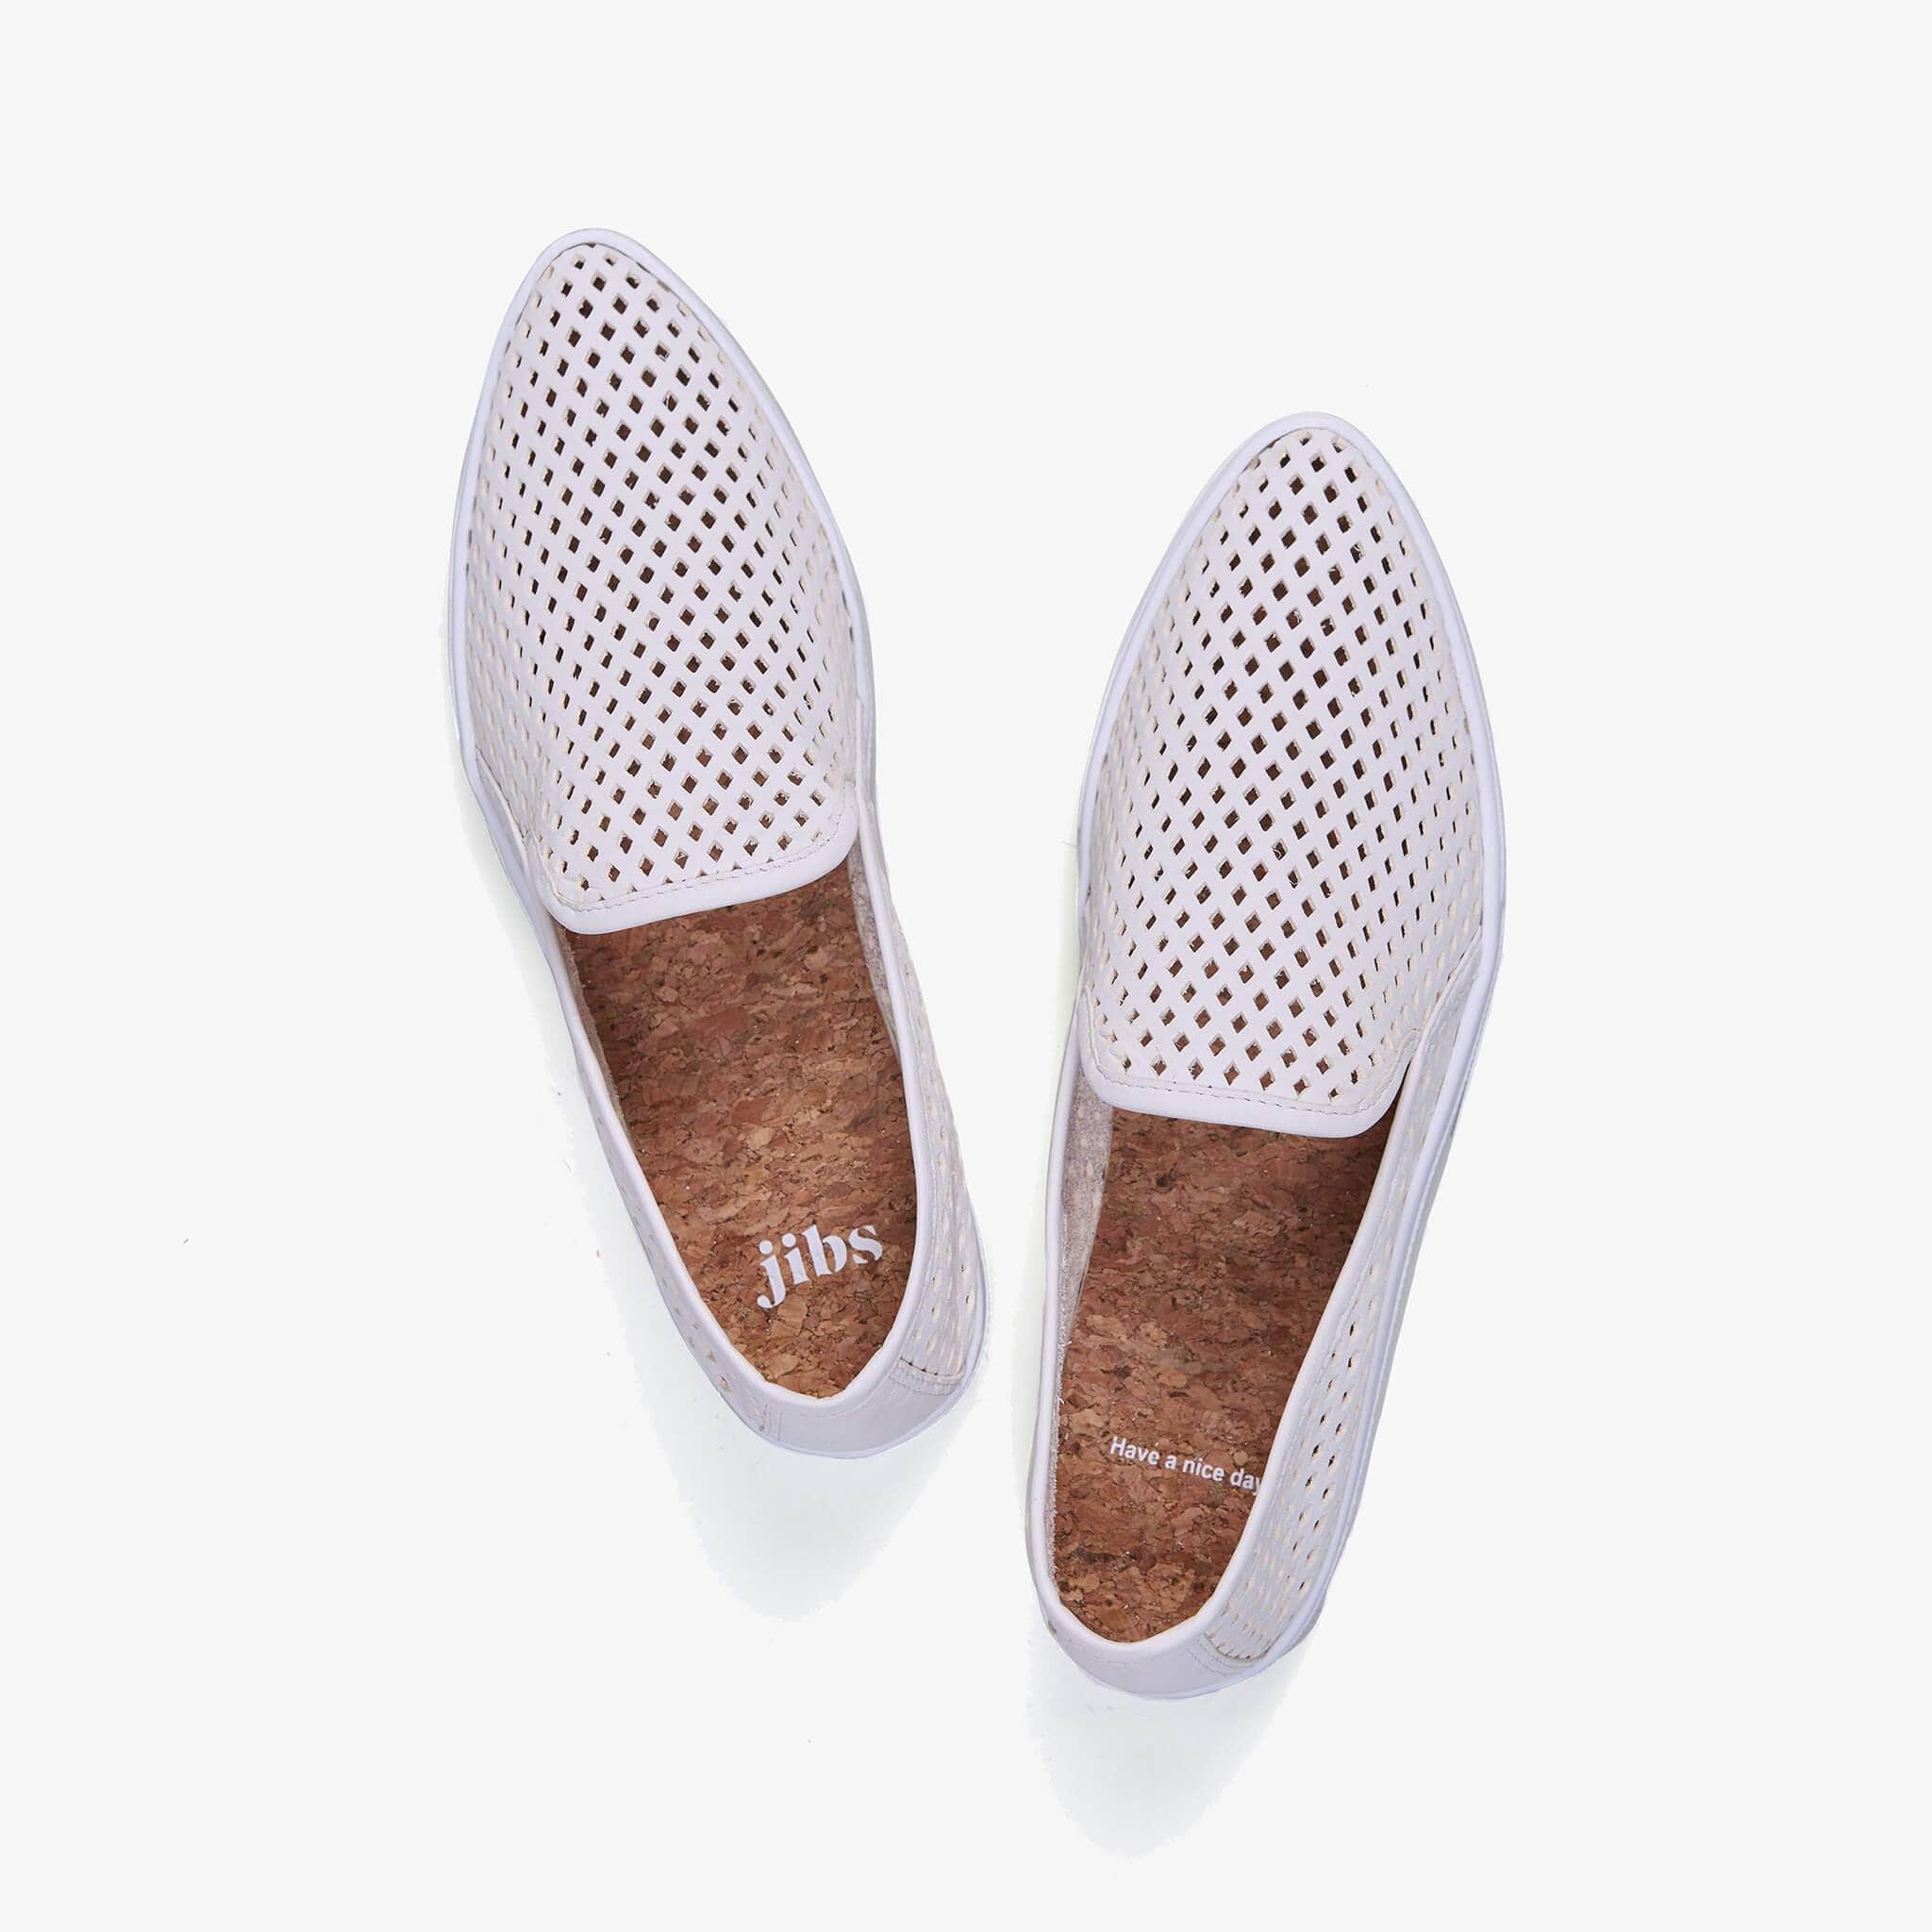 JIbs Slim Soft White Slip On Sneaker Flat Top Have A Nice Day